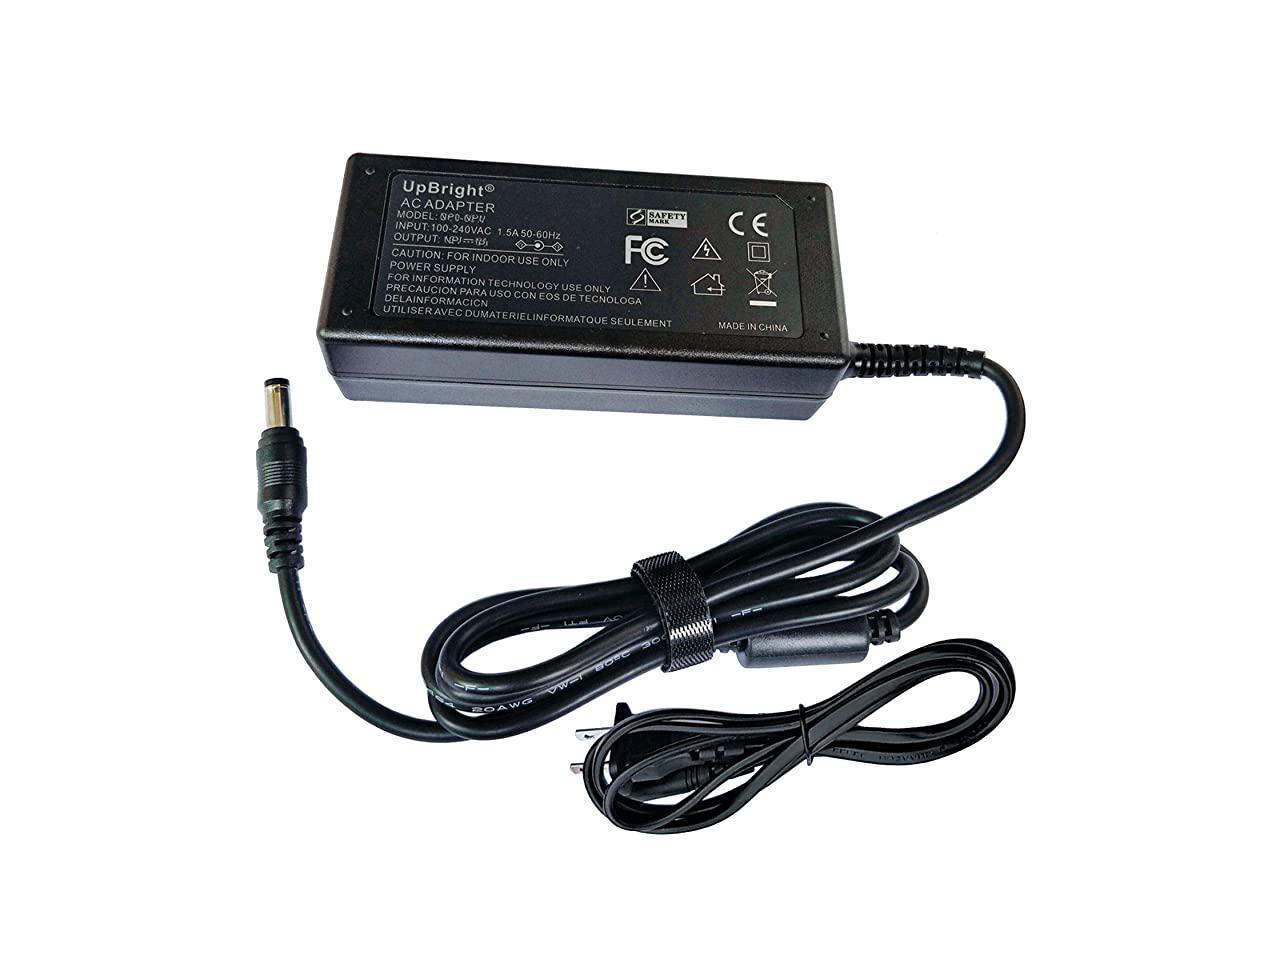 UpBright 18V 2A AC/DC Adapter Compatible with Precor EFX 546 EFX 556 EFX546 EFX556 EFX 524 EFX 534 EFX524 EFX534 EFX 546i EFX546i Rear Drive Elliptical Trainer Fitness Machine 18VDC 2A Power Supply 